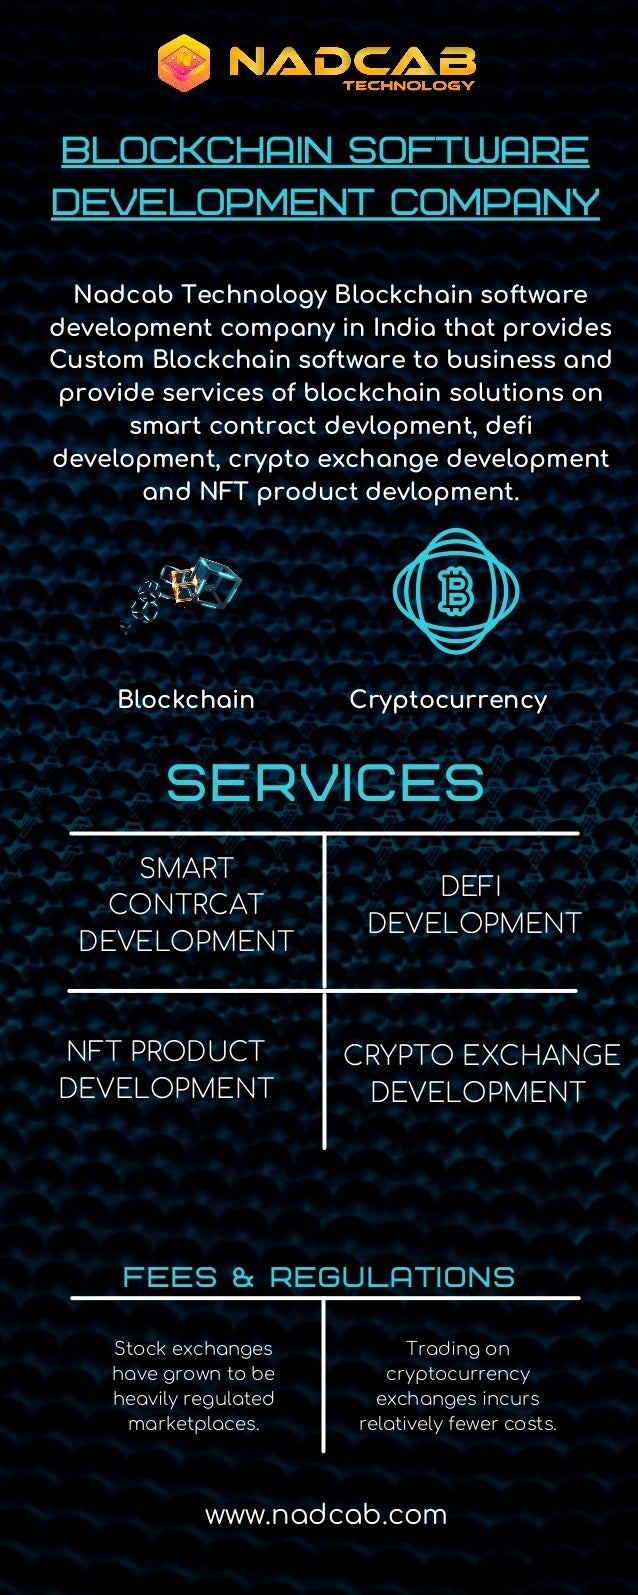 Fees & regulations
SERVICES
BLOCKCHAIN SOFTWARE
DEVELOPMENT COMPANY
Blockchain
Nadcab Technology Blockchain software
development company in India that provides
Custom Blockchain software to business and
provide services of blockchain solutions on
smart contract devlopment, defi
development, crypto exchange development
and NFT product devlopment.
SMART
CONTRCAT
DEVELOPMENT
NFT PRODUCT
DEVELOPMENT
Stock exchanges
have grown to be
heavily regulated
marketplaces.
DEFI
DEVELOPMENT
CRYPTO EXCHANGE
DEVELOPMENT
Trading on
cryptocurrency
exchanges incurs
relatively fewer costs.
Cryptocurrency
www.nadcab.com
 